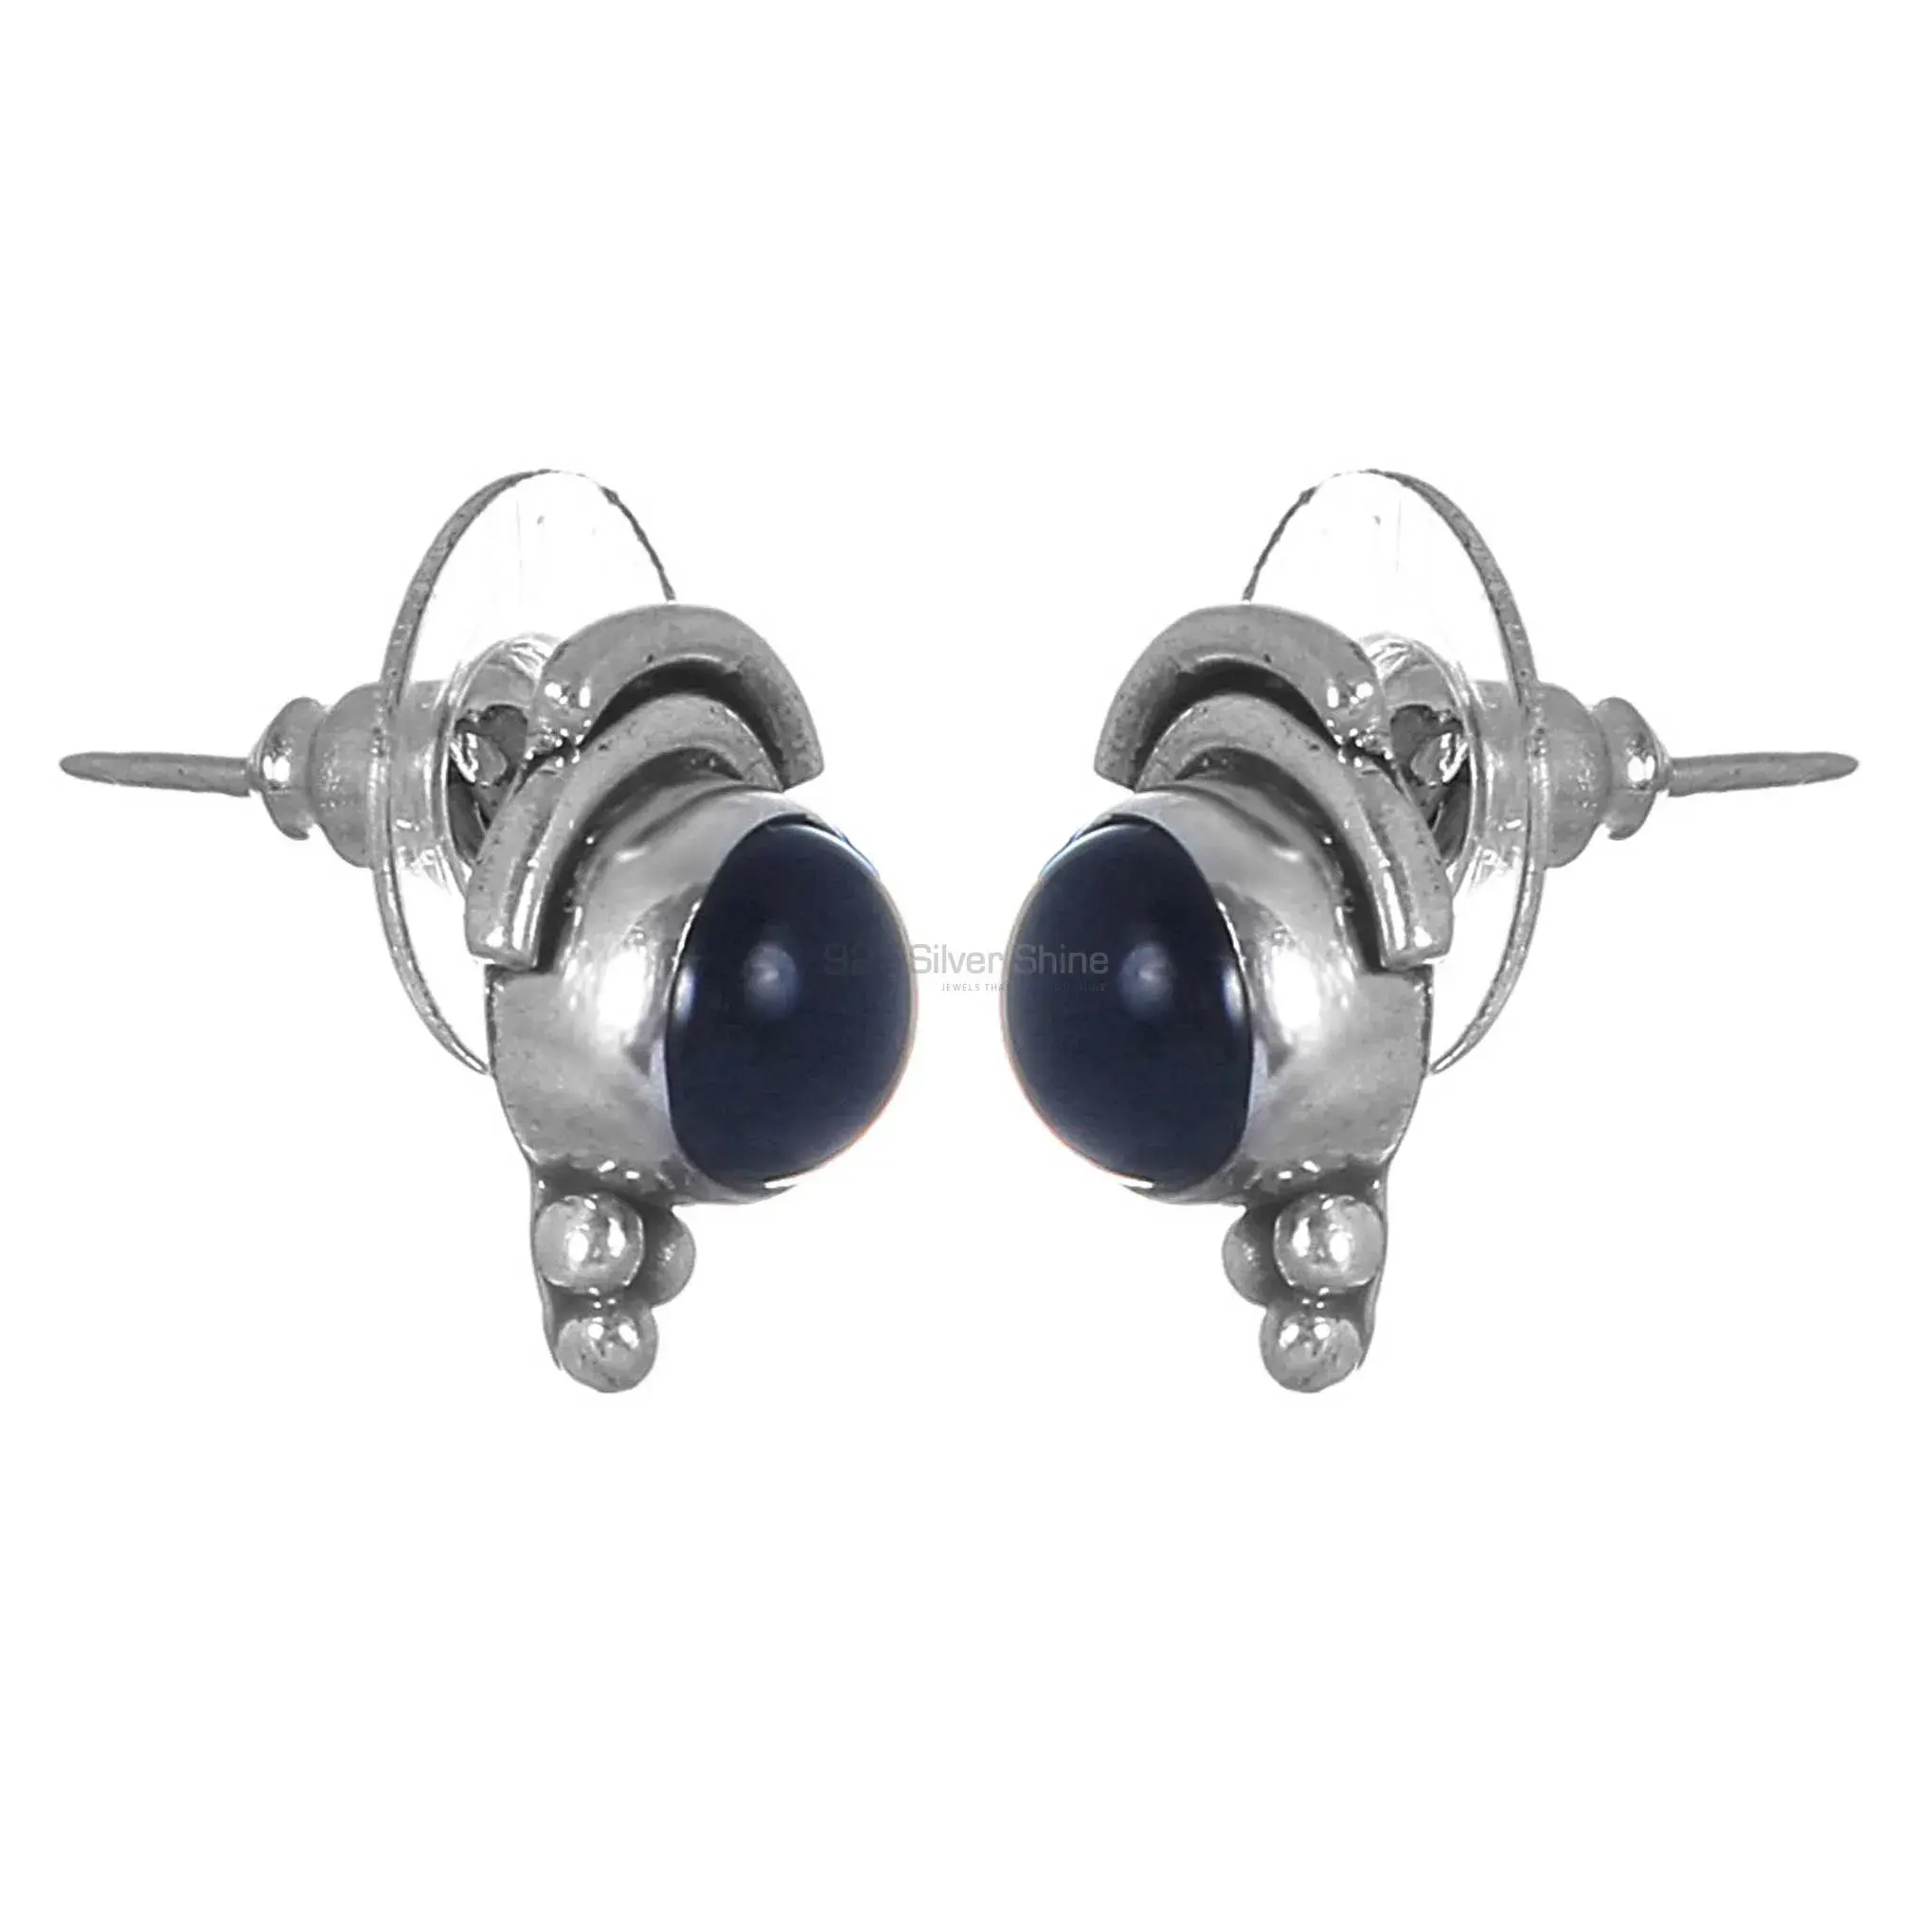 Natural Black onyx Gemstone Earrings Manufacturer In 925 Sterling Silver Jewelry 925SE262_0